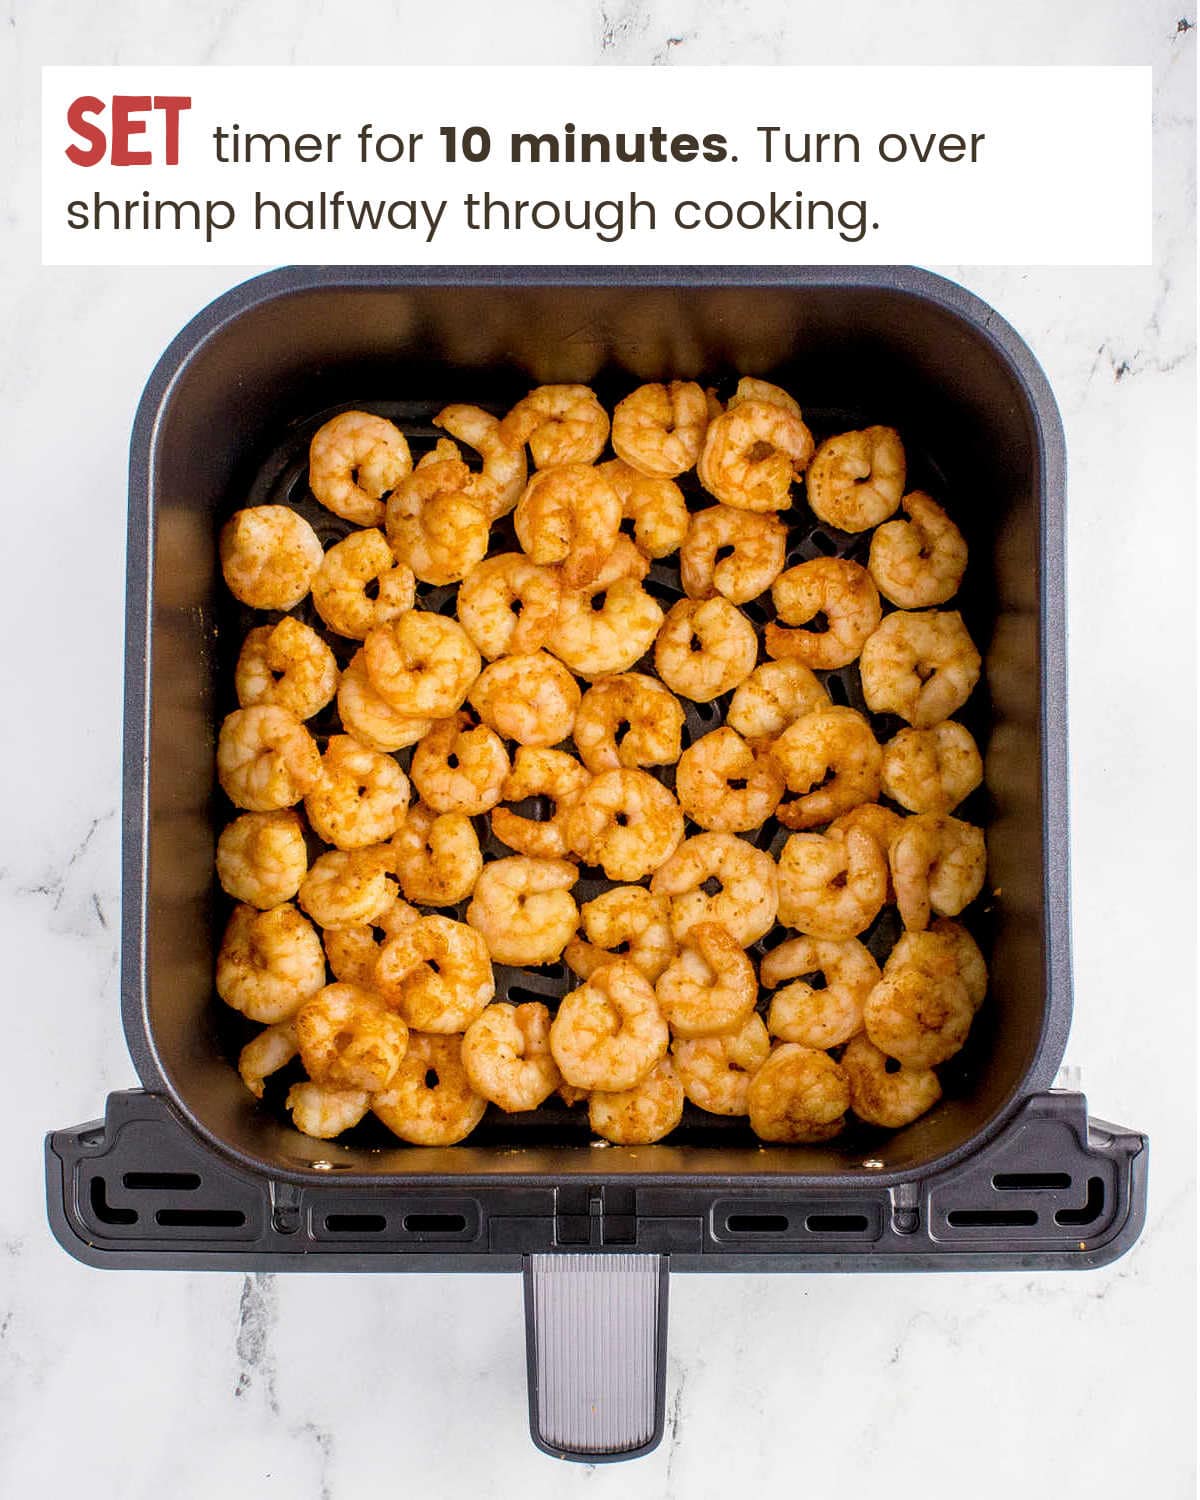 A cooked shrimp in an air fryer.